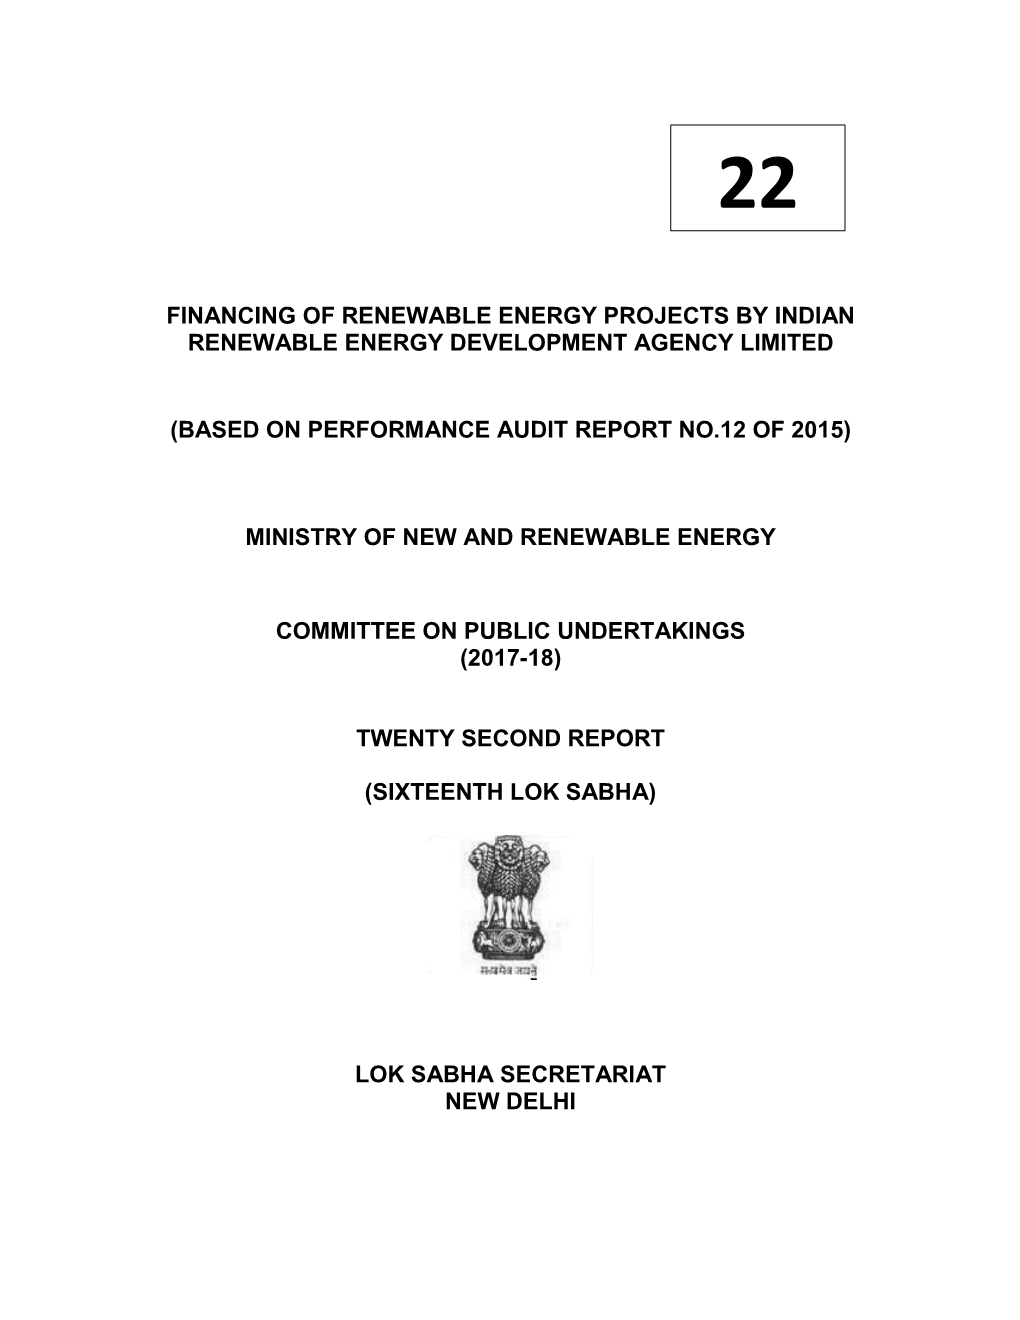 Financing of Renewable Energy Projects by Indian Renewable Energy Development Agency Limited